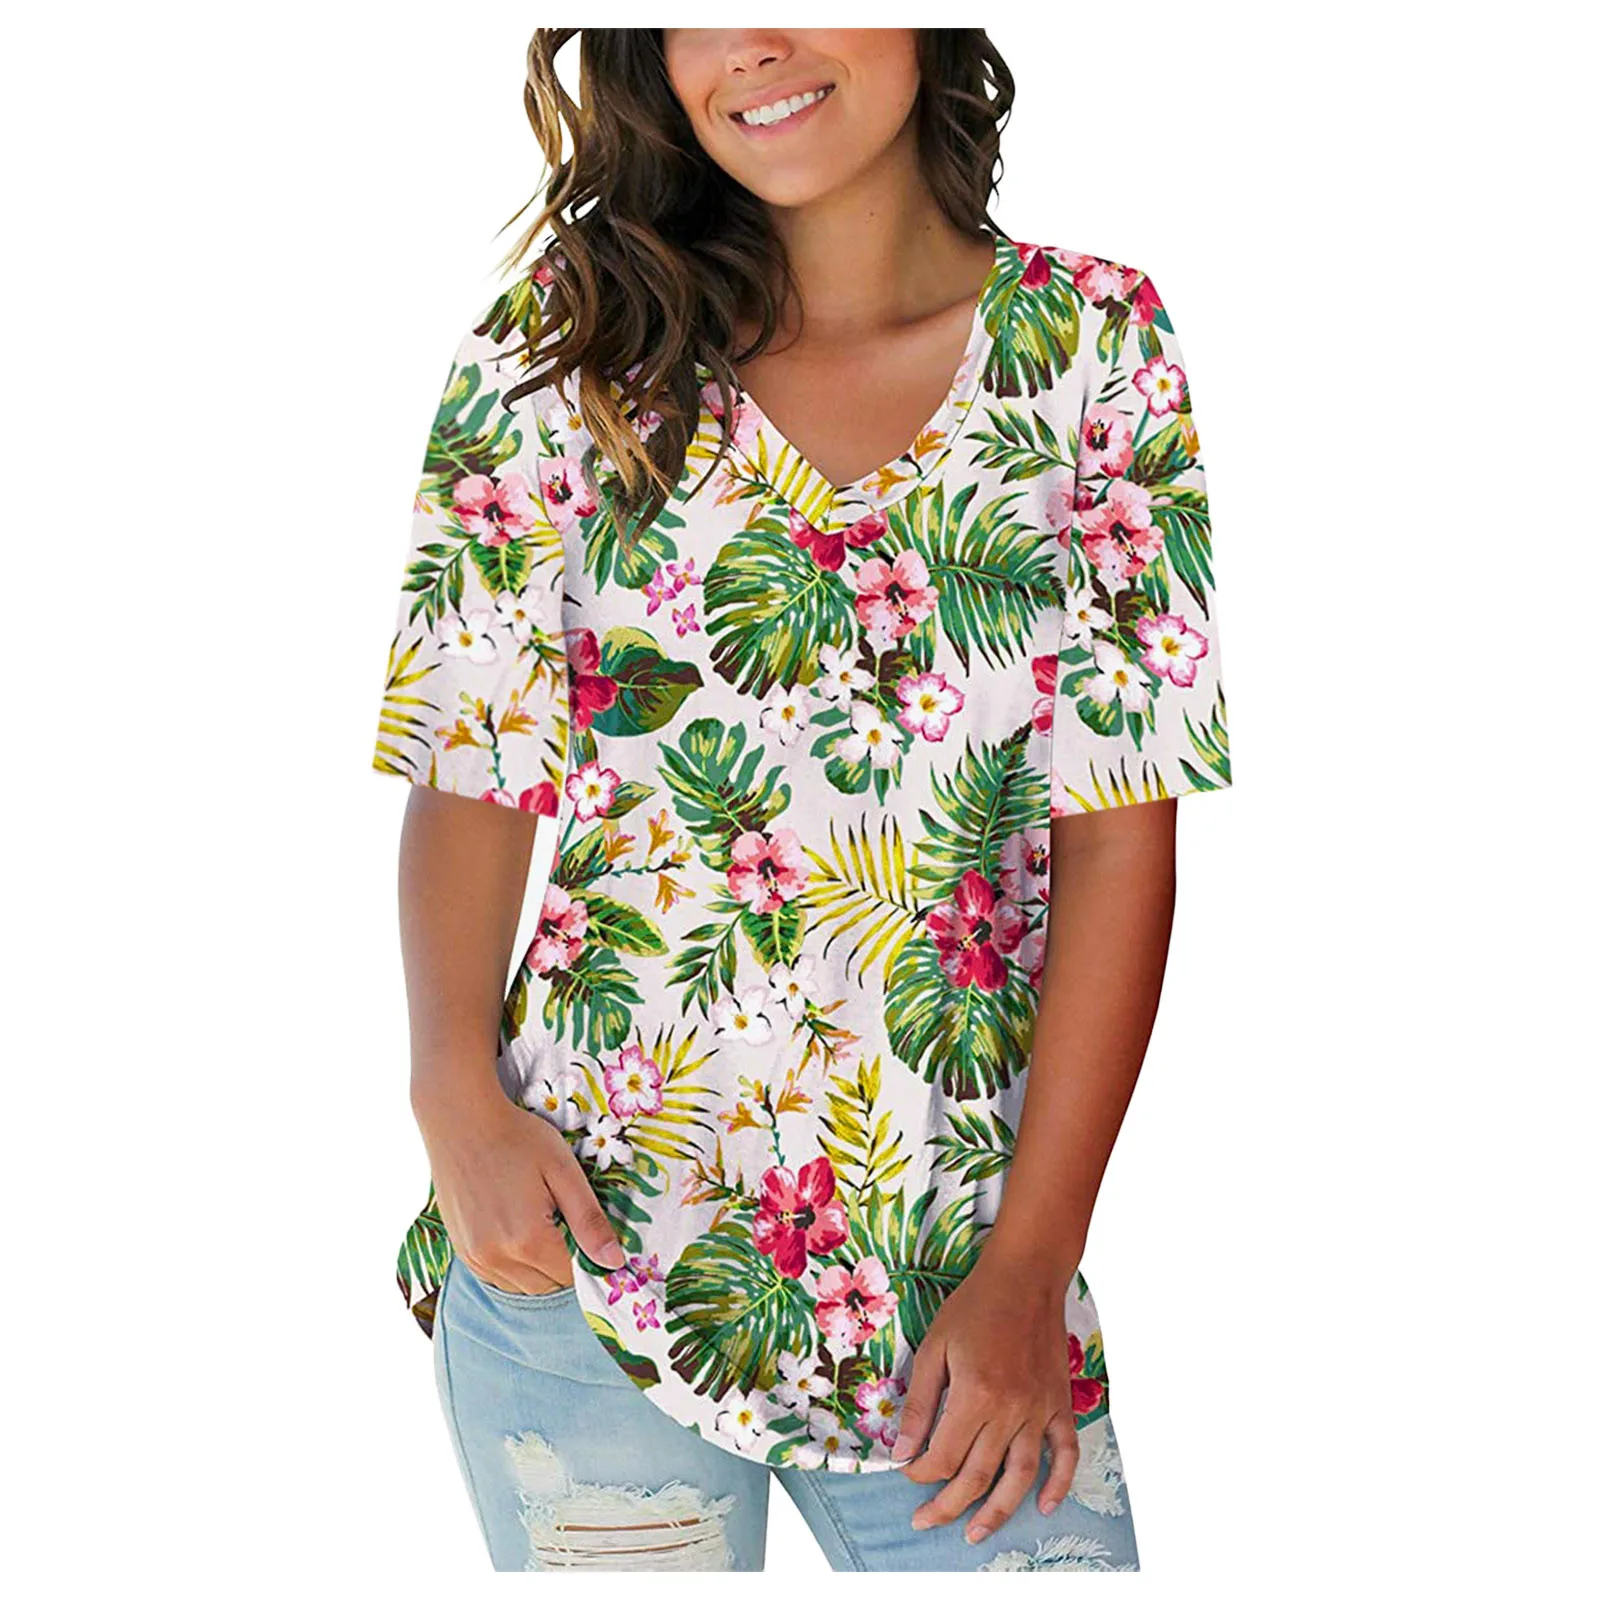 

Women Floral Print Blouse Summer Tops V Neck Shirts Summer Bohemian Loose Beach Women Tops And Bloues Loose Blusas Mujer 2022